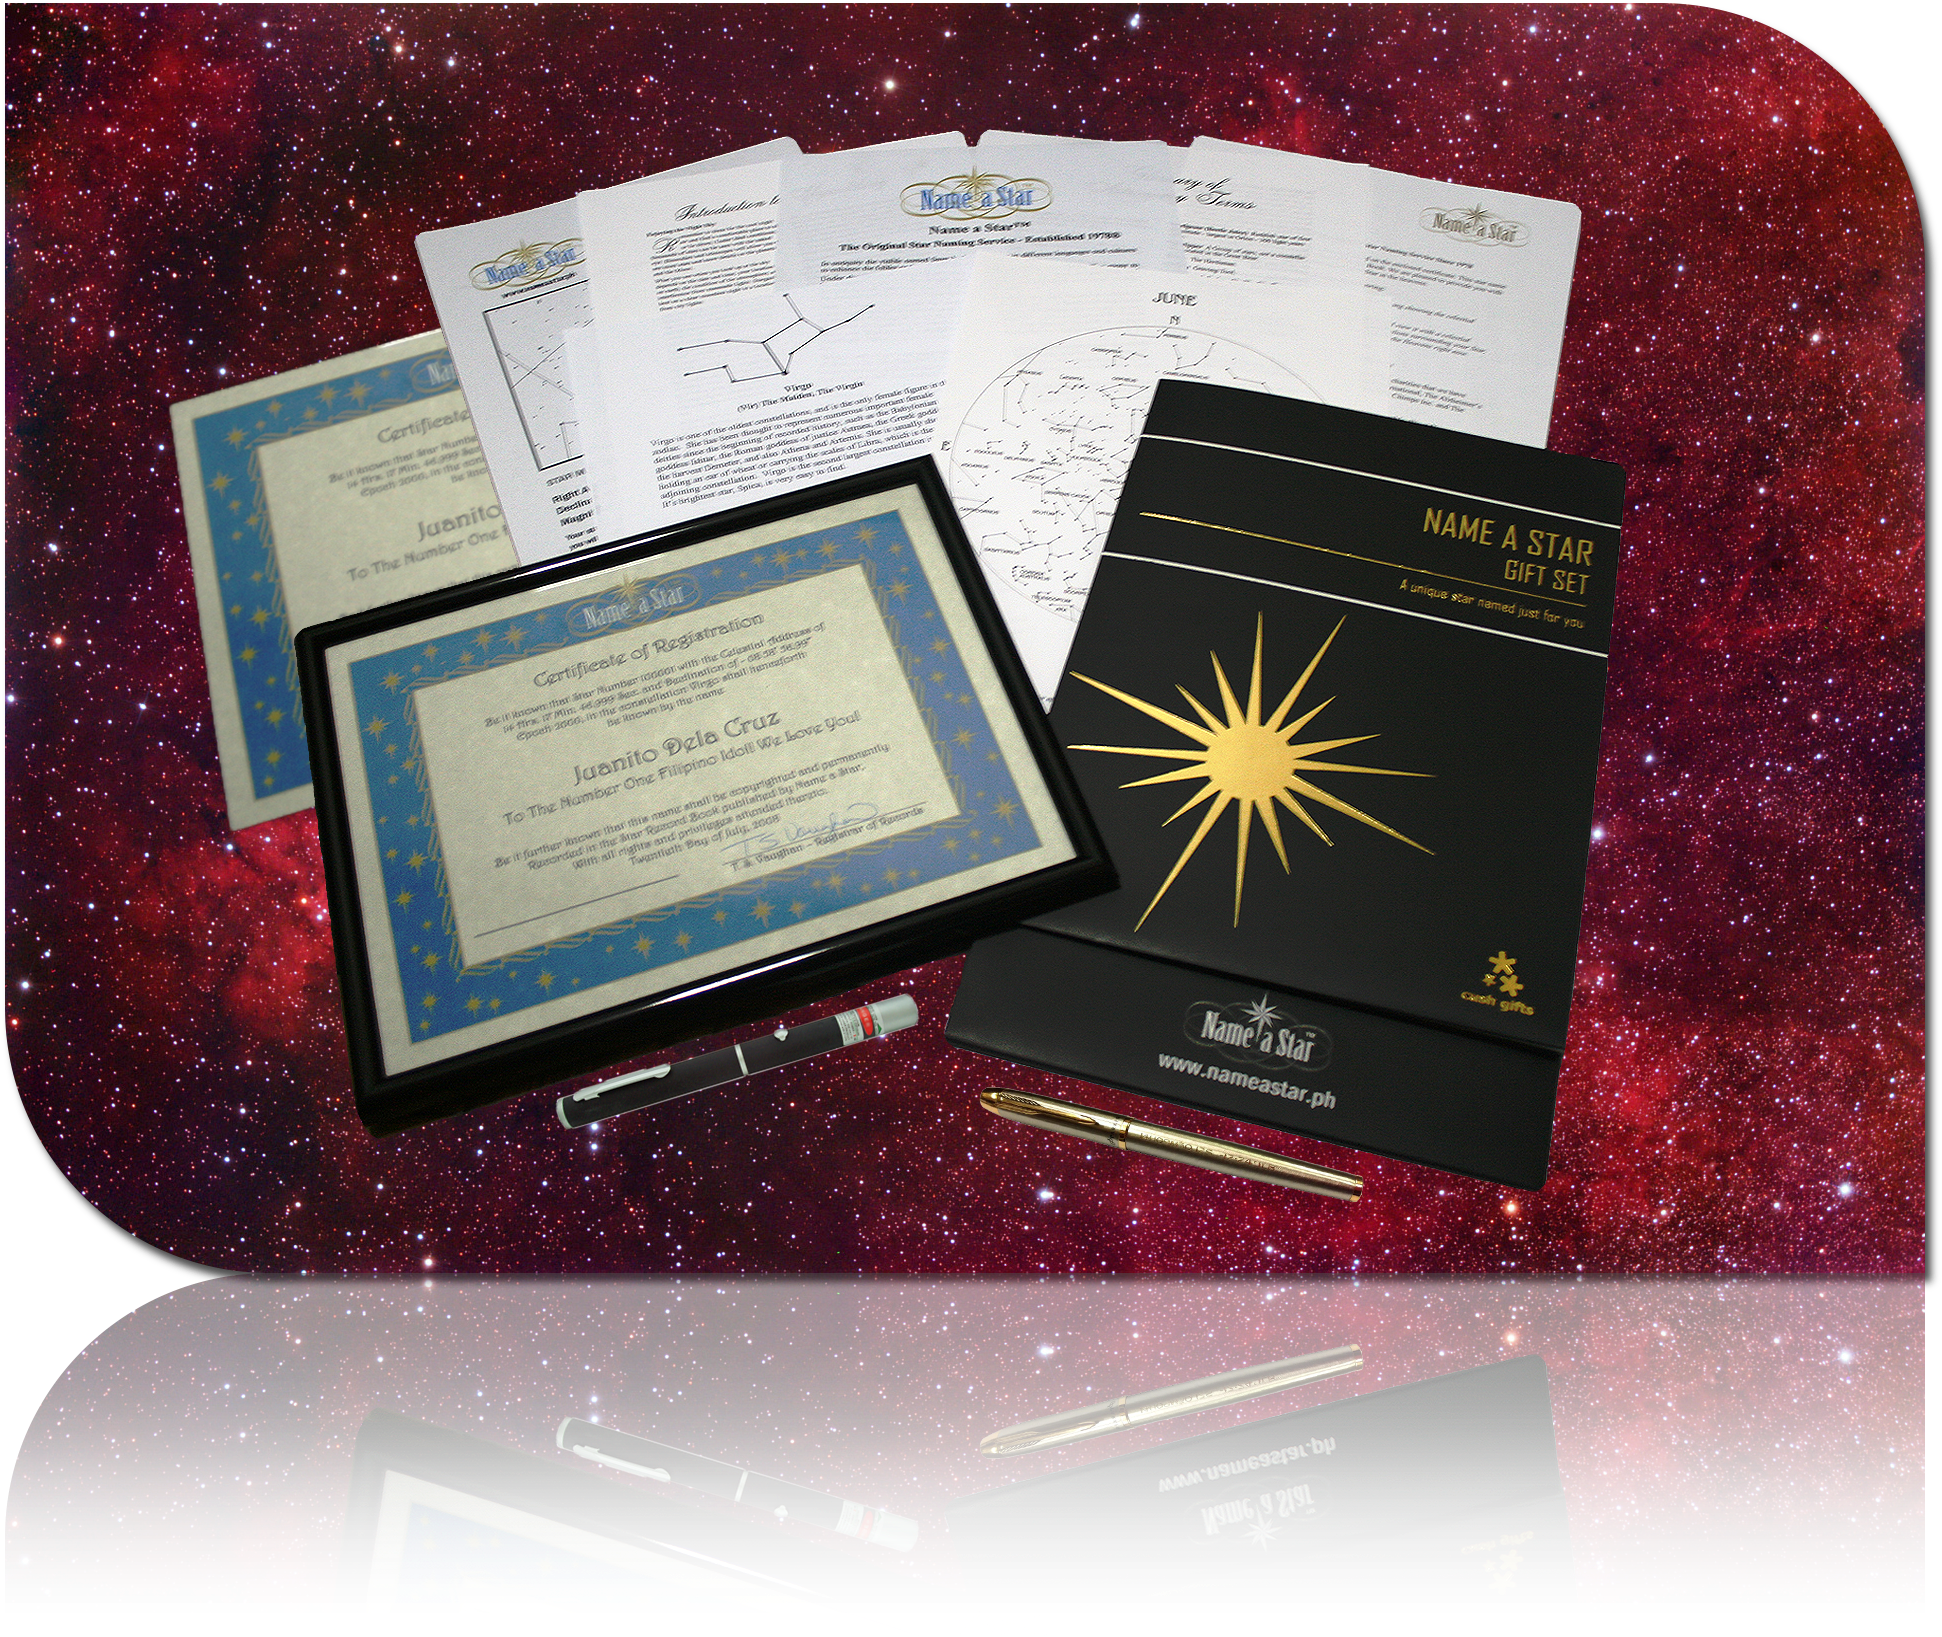 Name A Star: Star-Name-Registry Extra Bright Star Gift Set Review – You  Have To Laugh